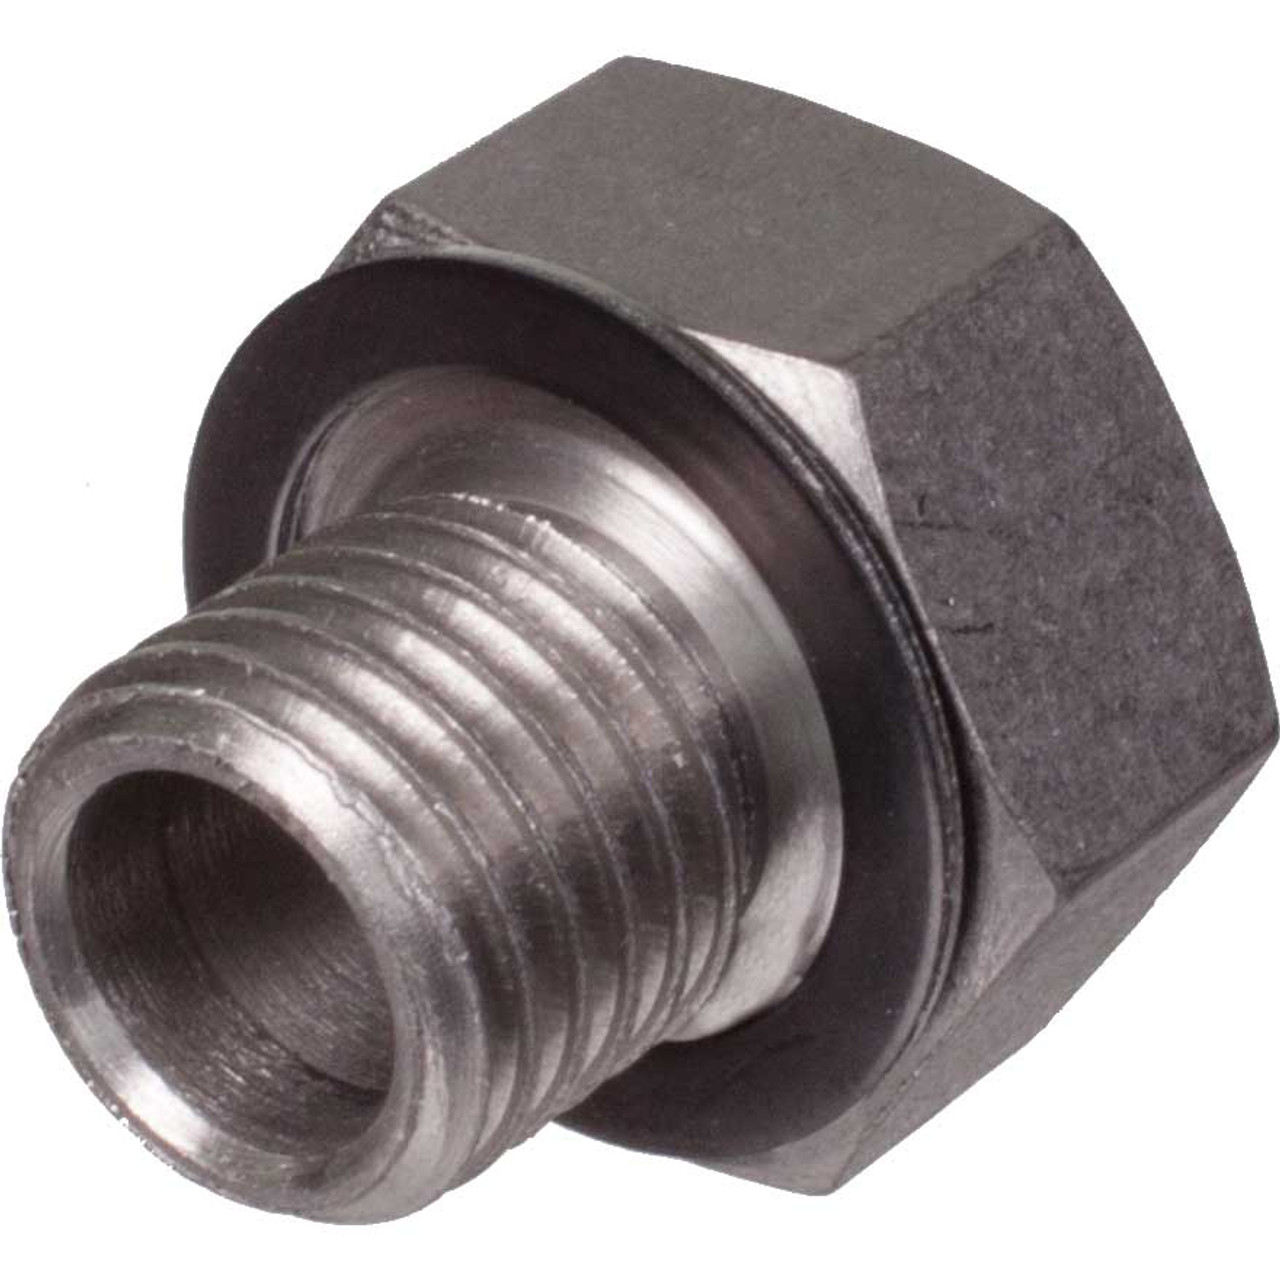 Metric Adapter, 1/8 inch NPT Female to M12X1.75 Male (Stainless Steel)